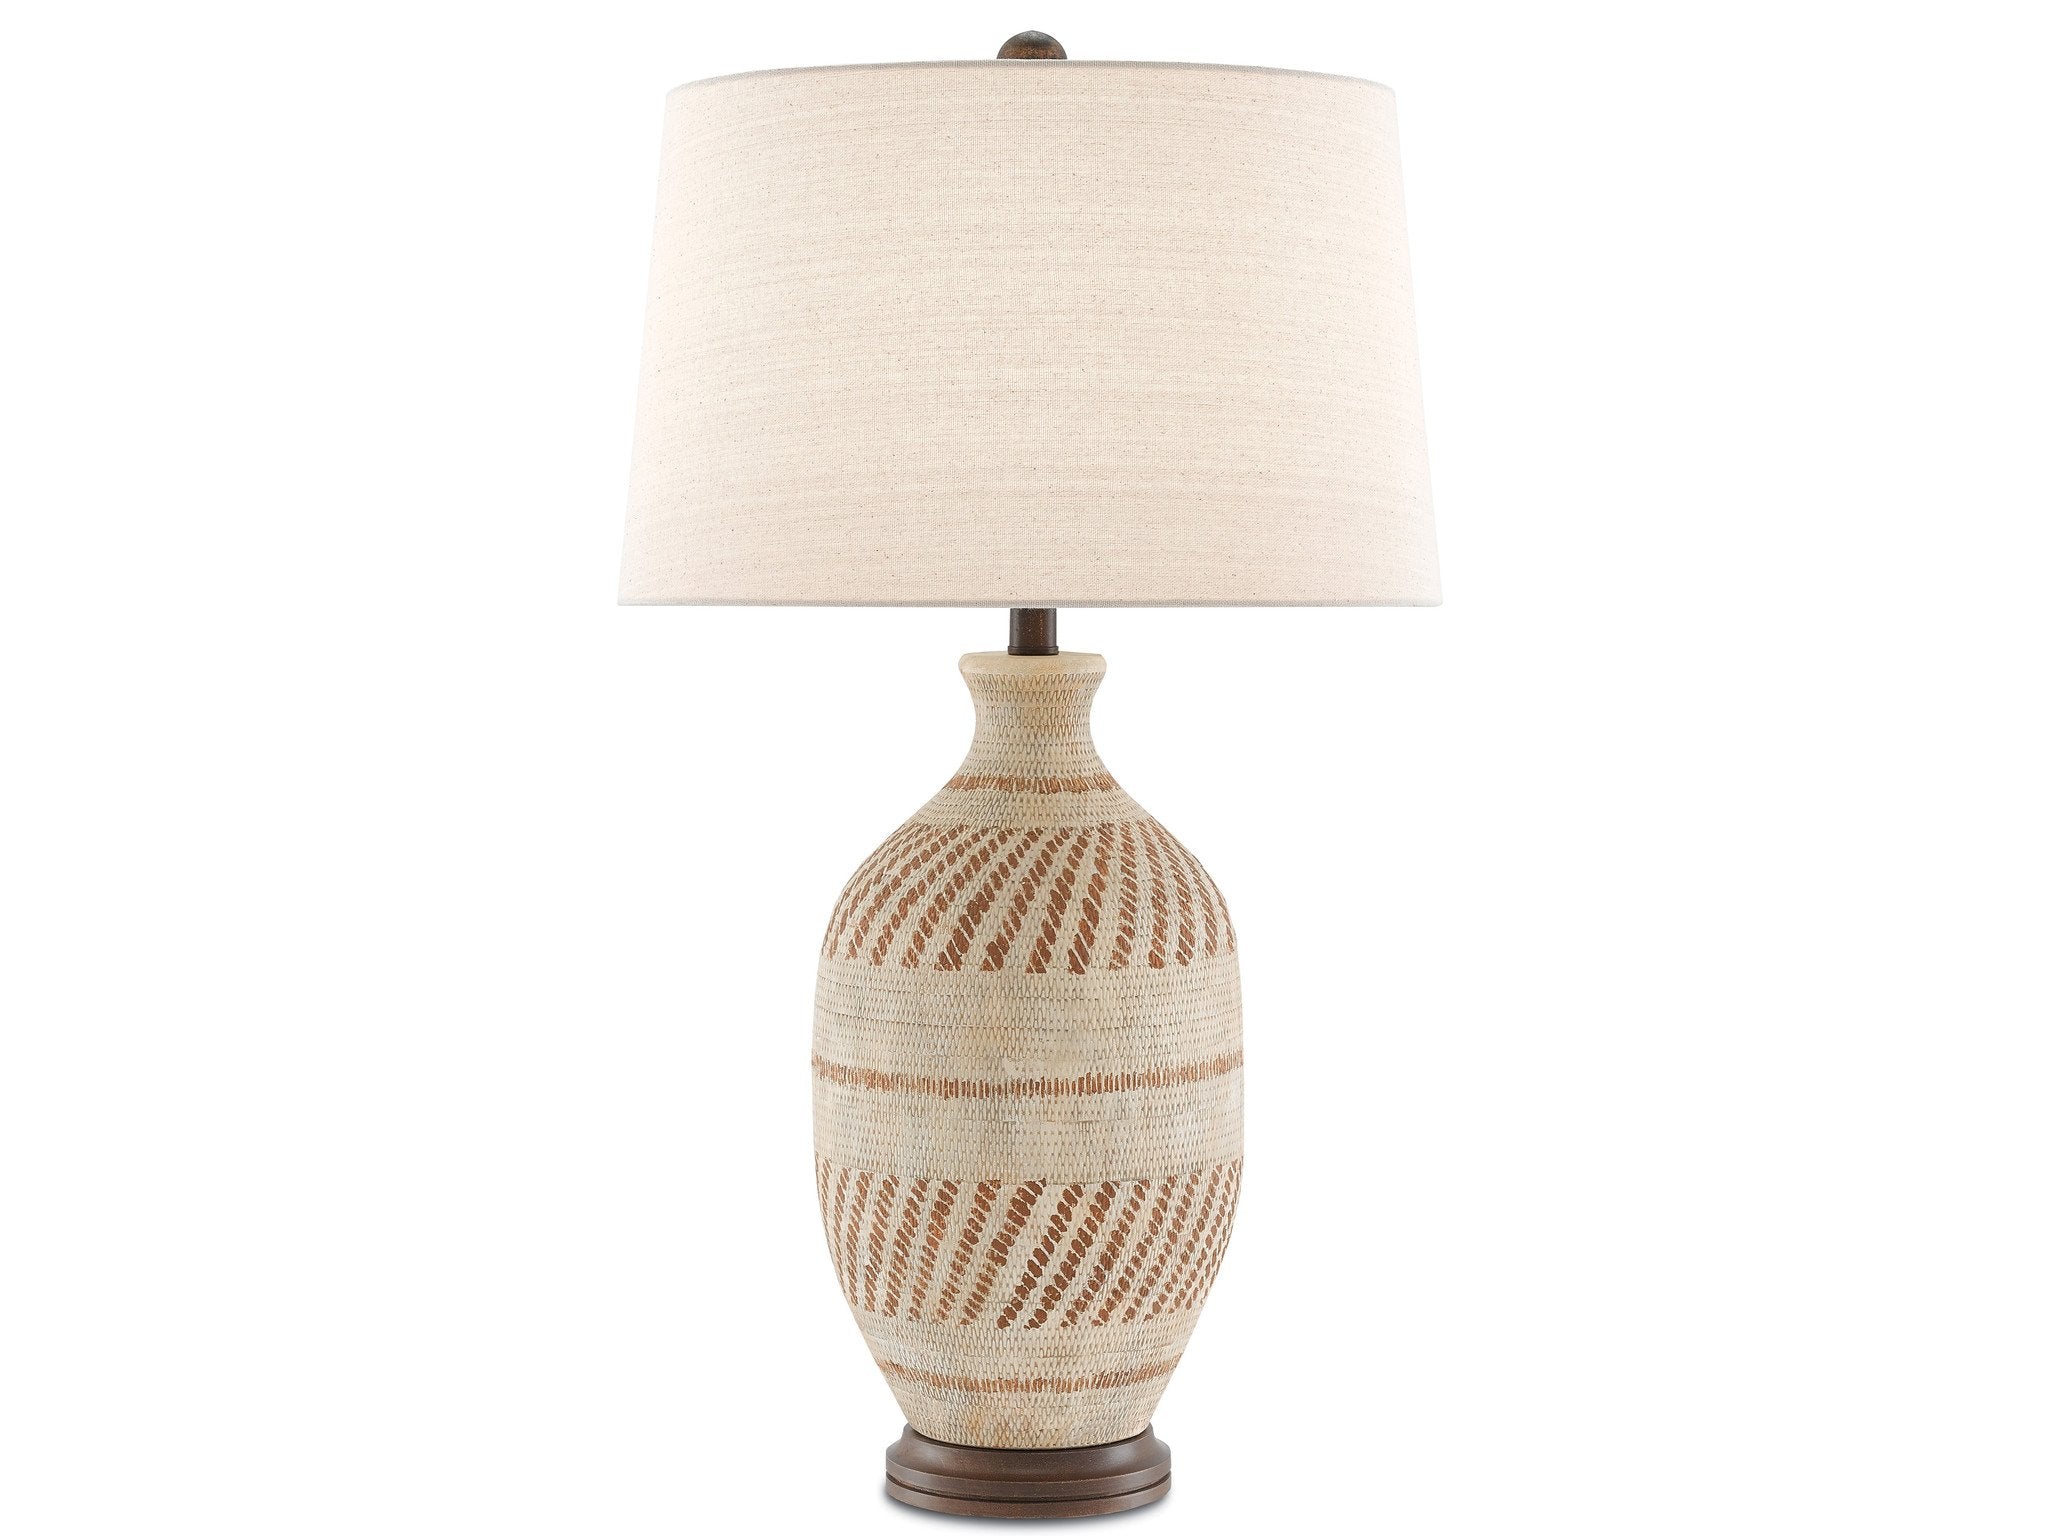 Faiyum Table Lamp in Tan design by Currey and Company